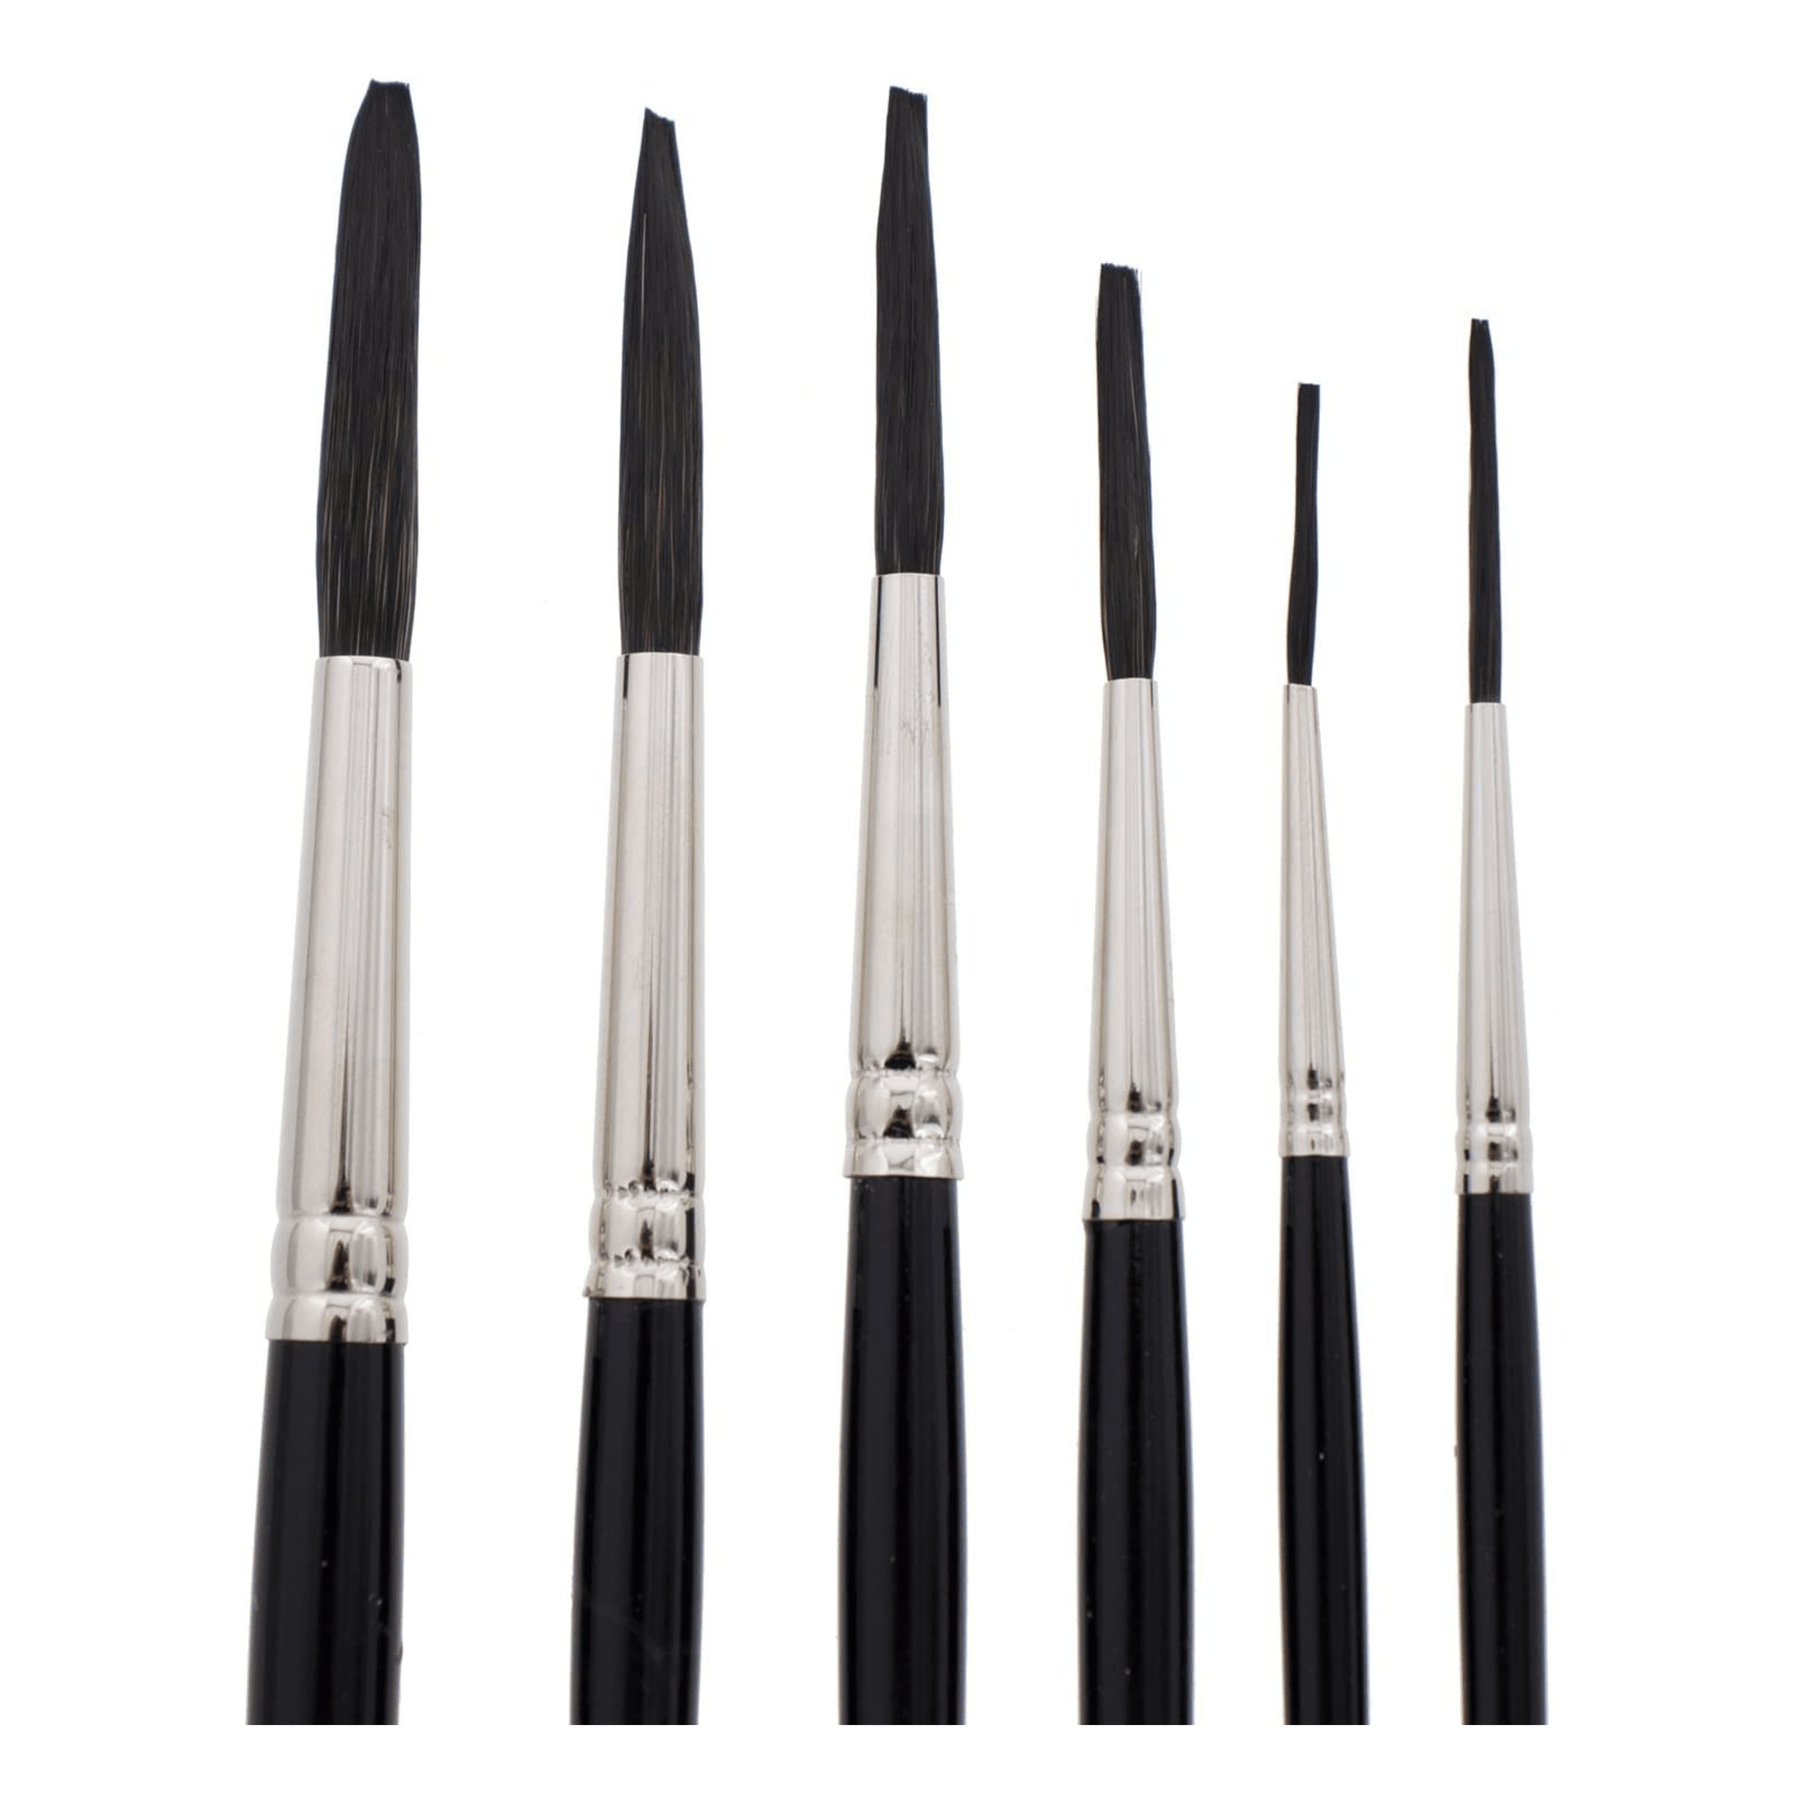 Squirrel and Black Synthetic Mix Quill Sizes 0-10 Pinstriping Brushes - 6 PACK - Maazzo